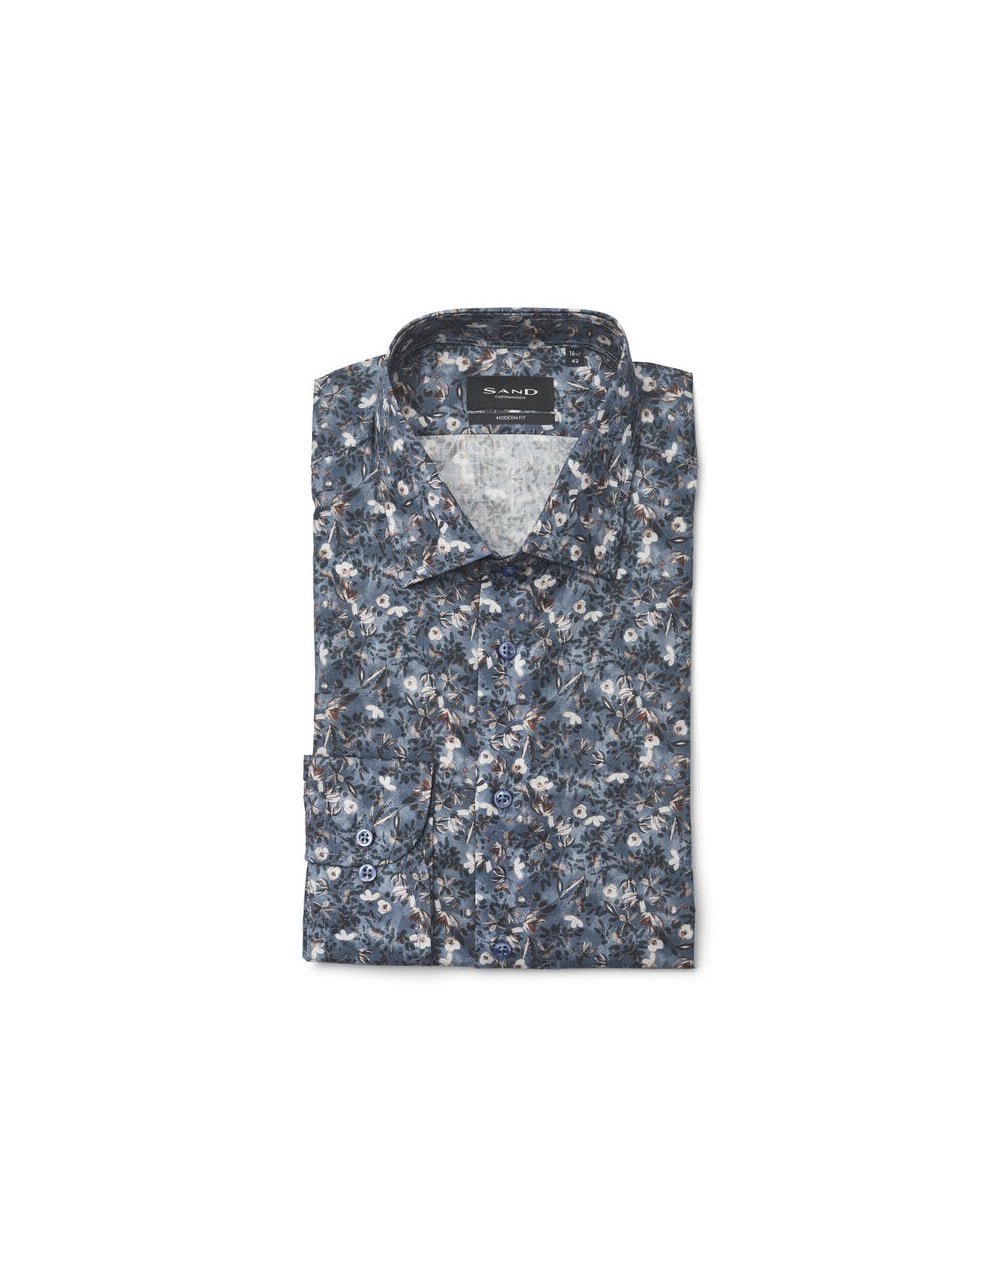 SAND State N Mirco Floral Shirt Col: 550 Blue Multi, Size: 41